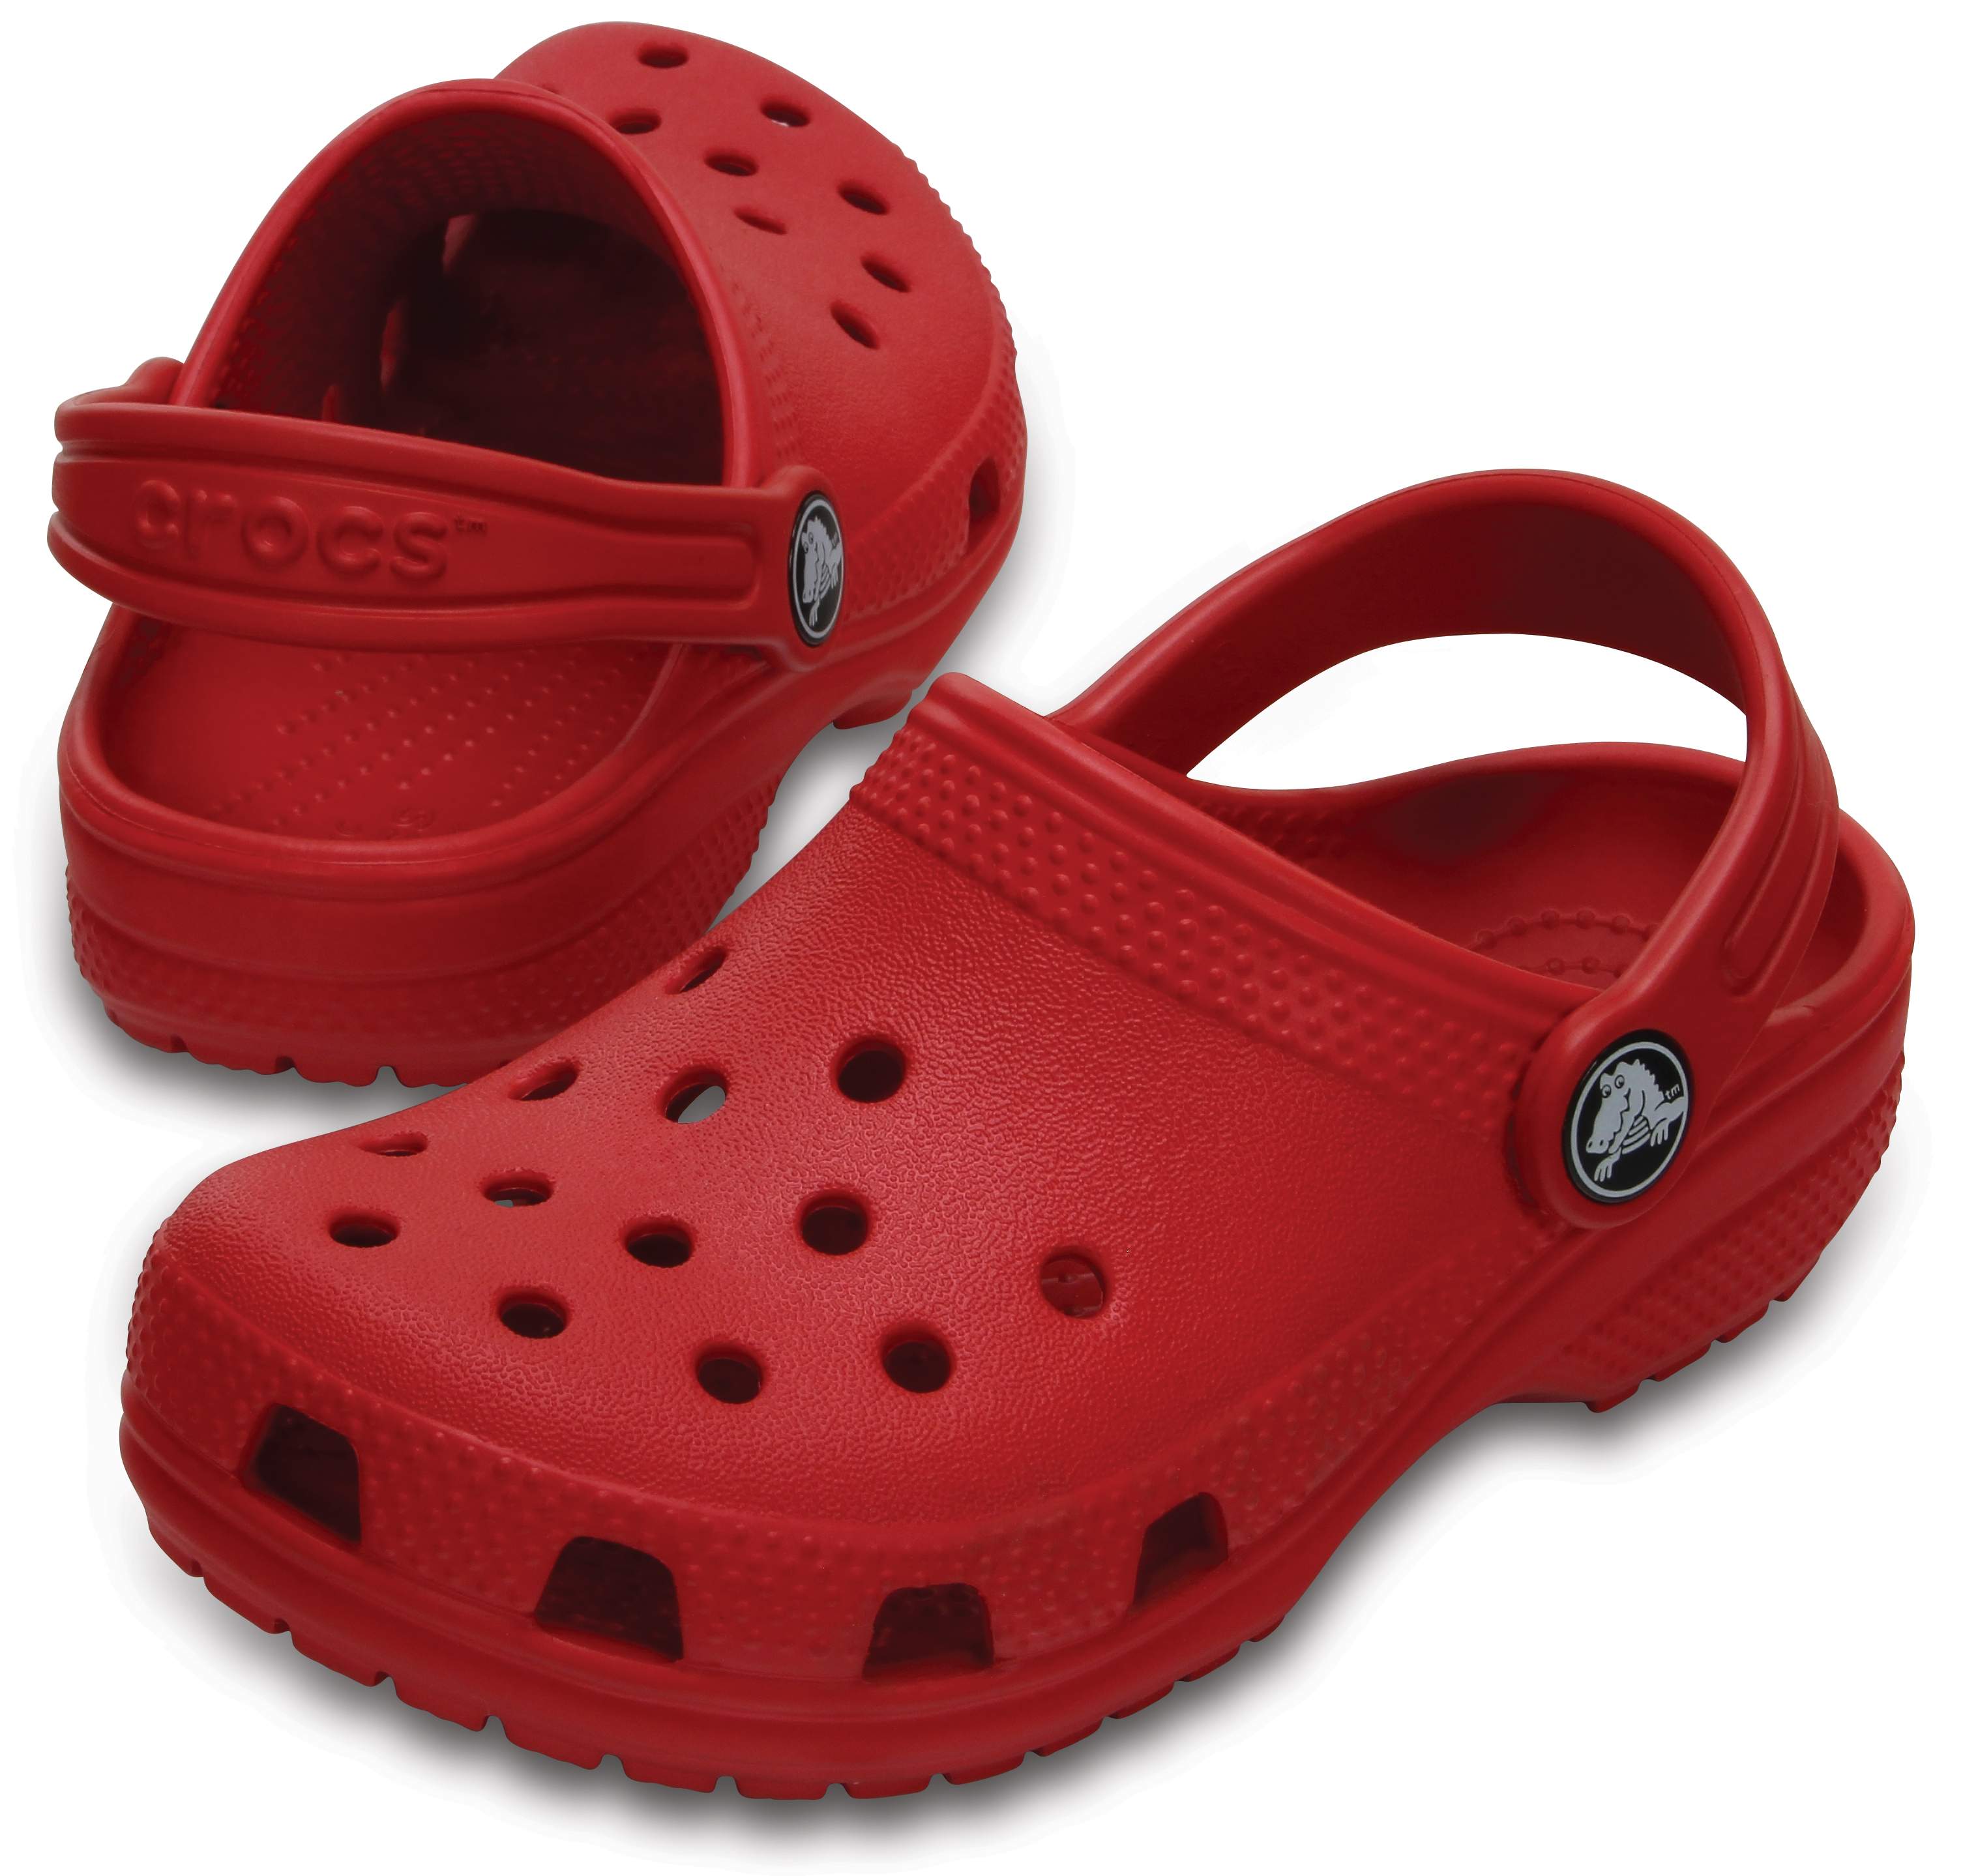 crocs size for 10 year old